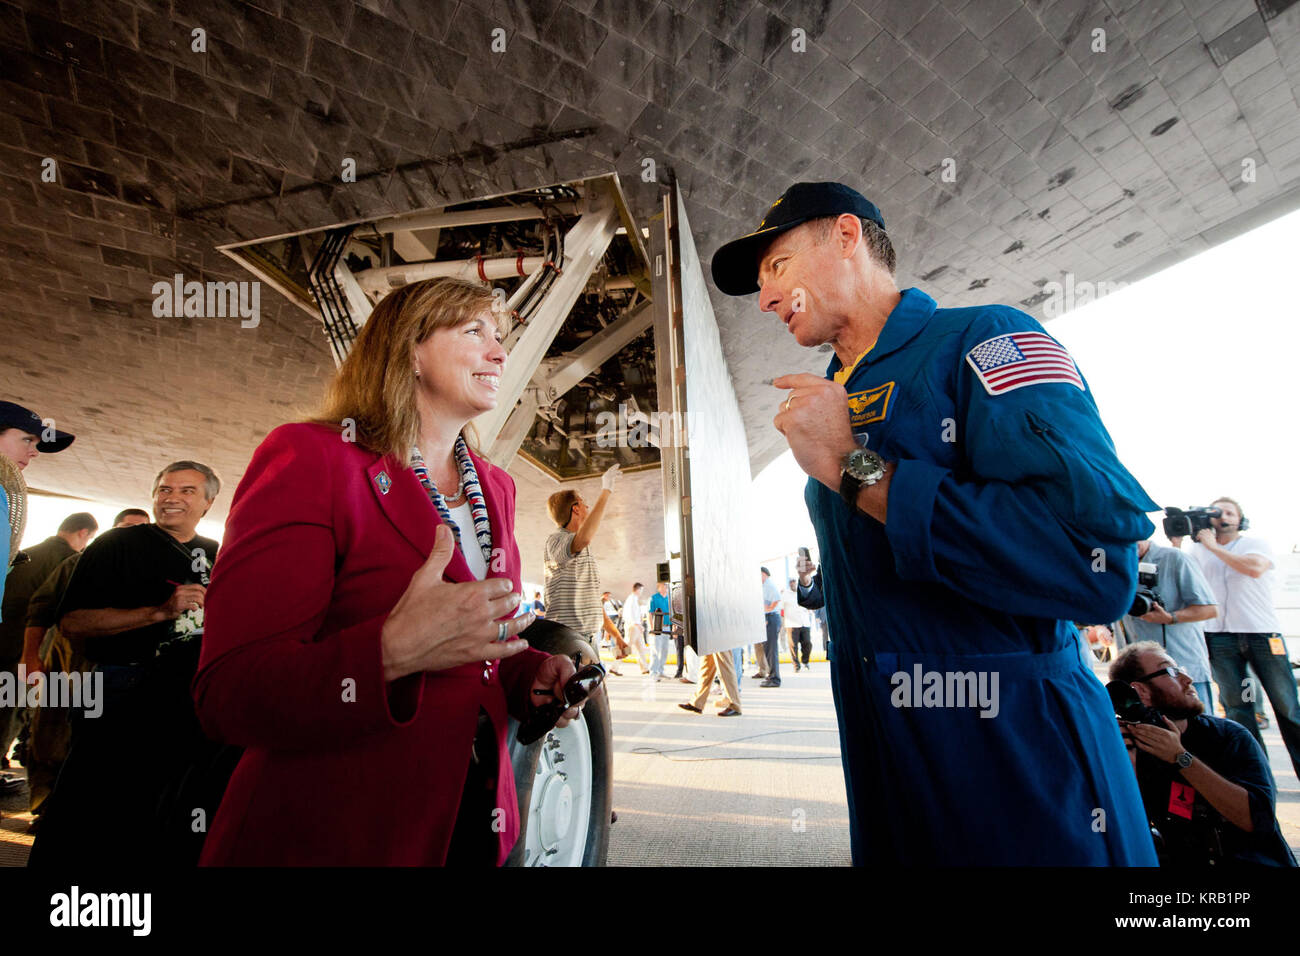 NASA Deputy Administrator Lori Garver and Commander Chris Ferguson talk underneath the space shuttle Atlantis shortly after Ferguson and the rest of the STS-135 crew landed at NASA's Kennedy Space Center Shuttle Landing Facility (SLF), completing its 13-day mission to the International Space Station (ISS) and the final flight of the Space Shuttle Program, early Thursday morning, July 21, 2011, in Cape Canaveral, Fla. Overall, Atlantis spent 307 days in space and traveled nearly 126 million miles during its 33 flights. Atlantis, the fourth orbiter built, launched on its first mission on Oct. 3, Stock Photo